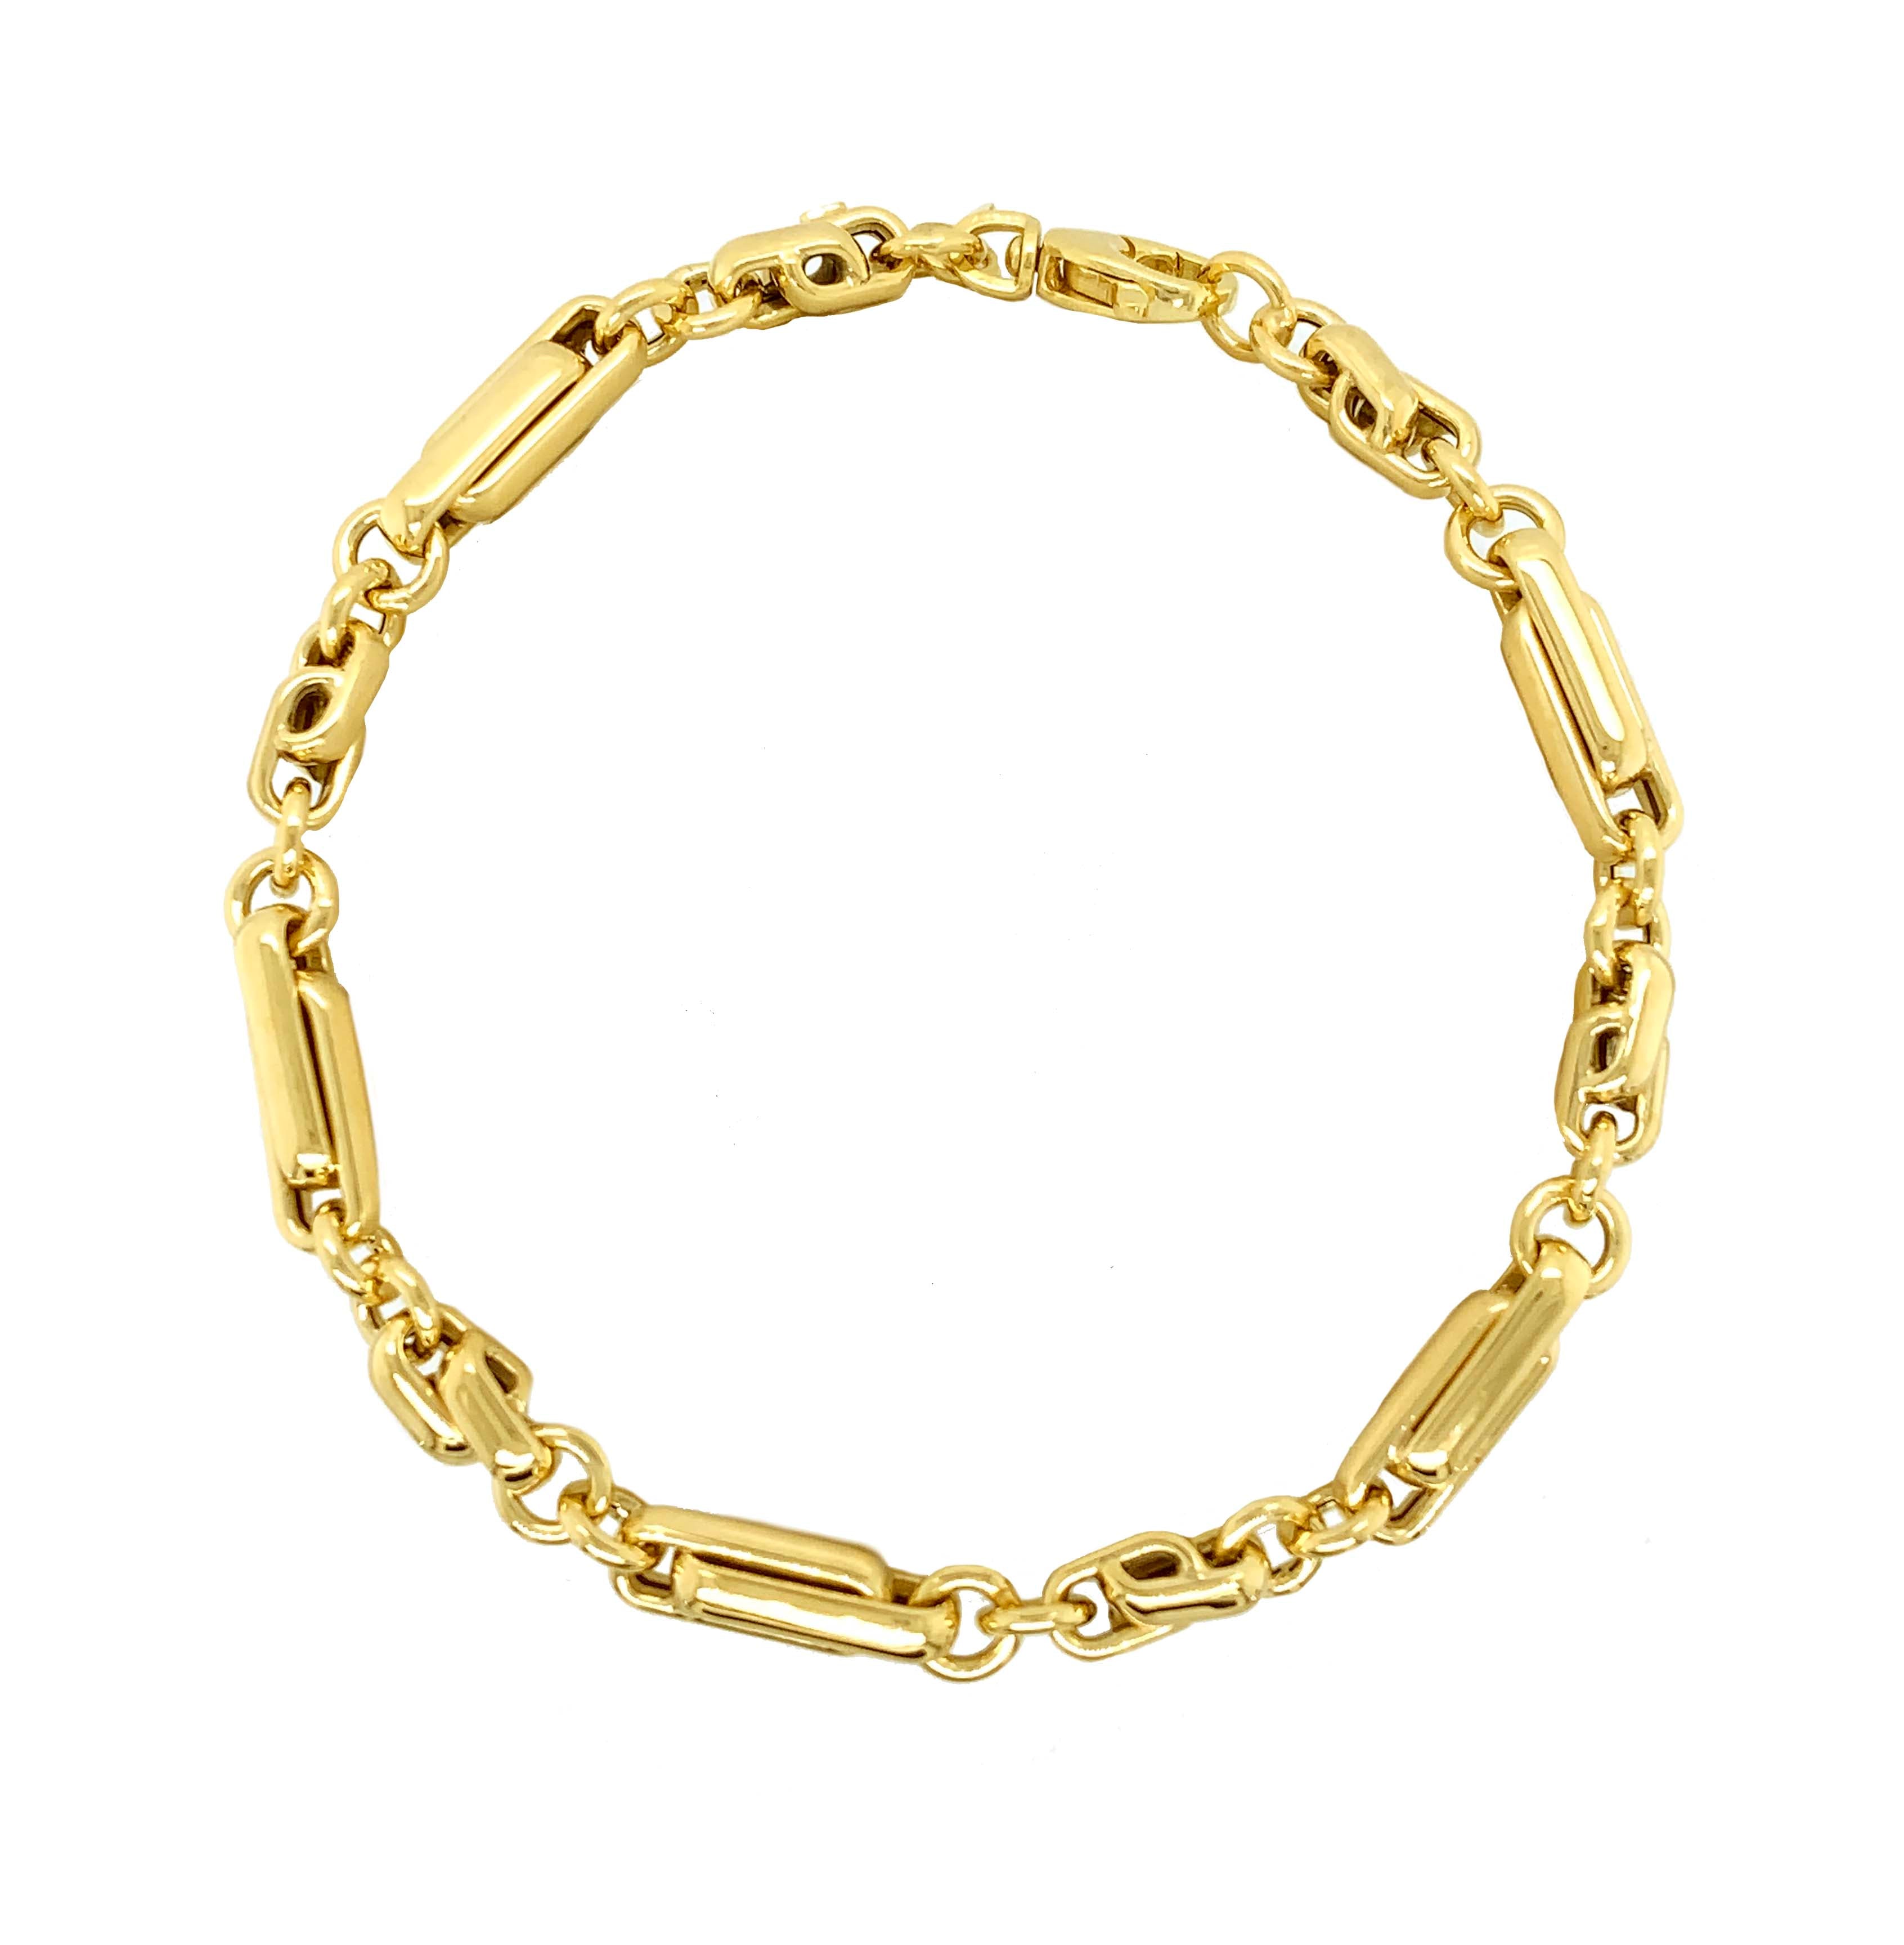 YELLOW GOLD LONG AND SHORT KNOT BRACELET